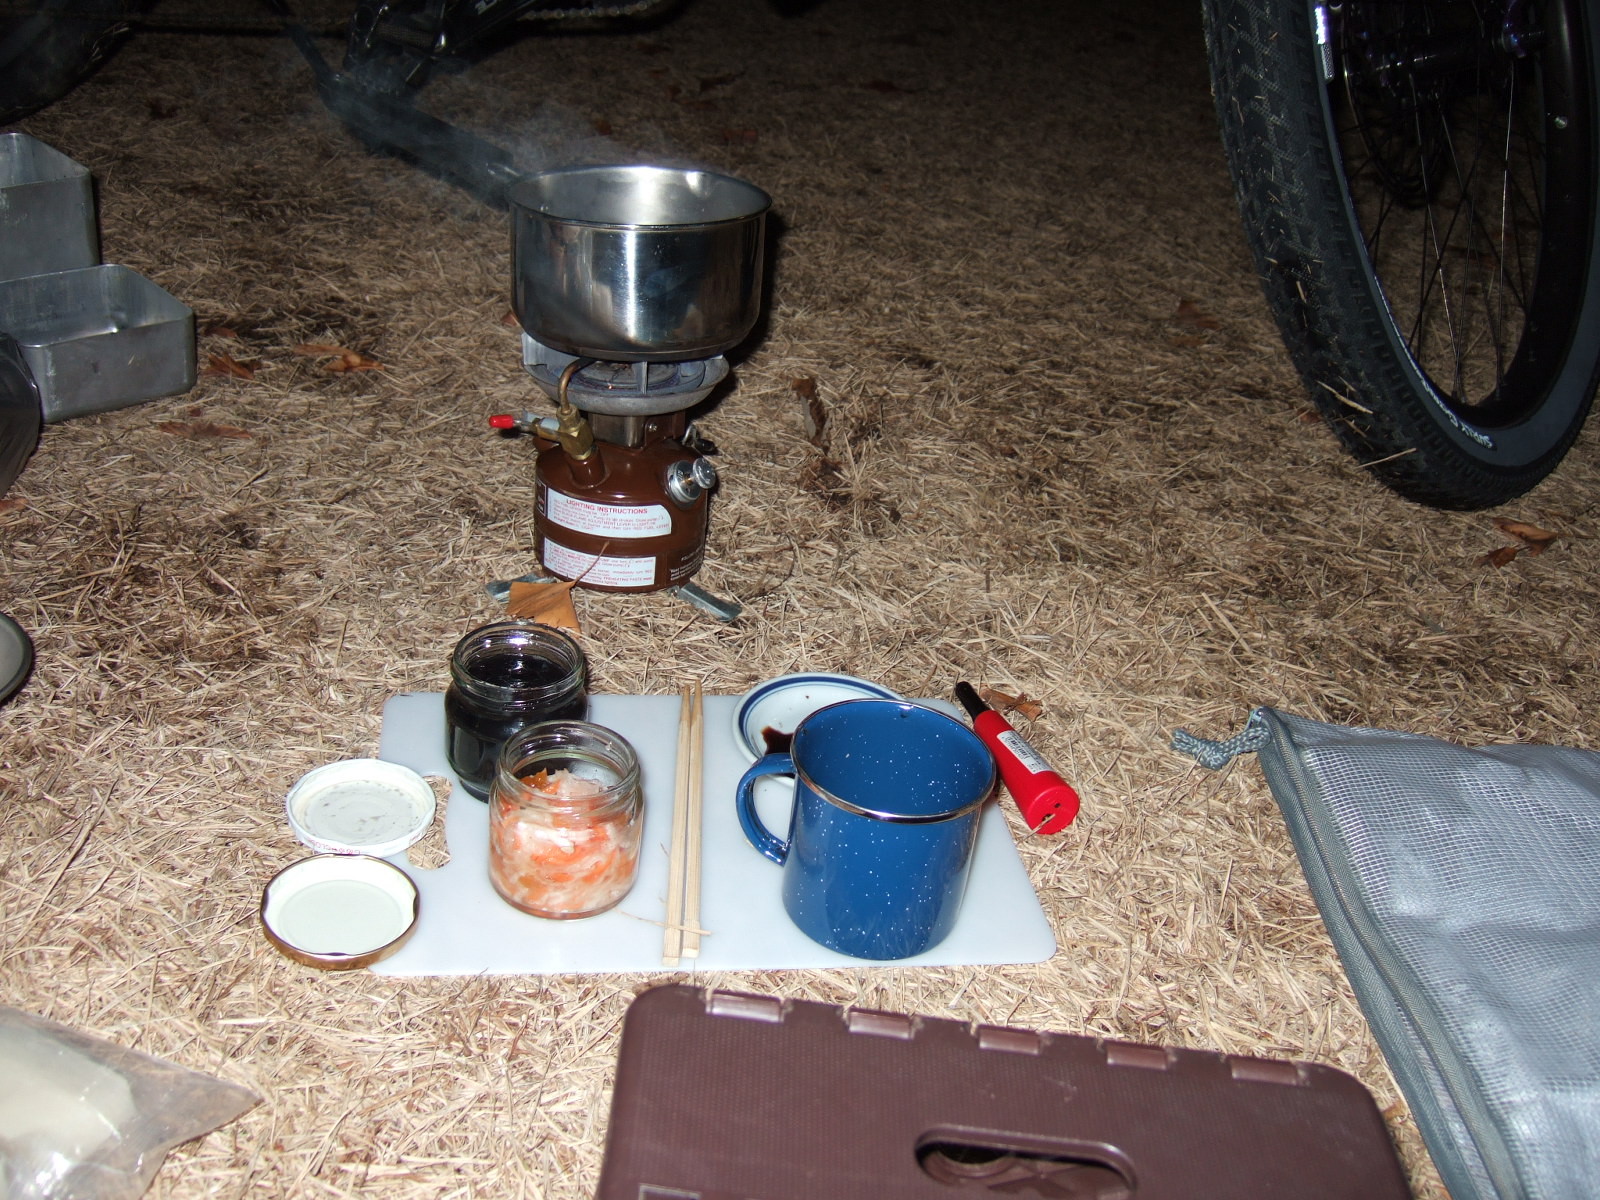 A small jar of sweet-and-sour carrot and radish salad, a small jar sweet black beans, a coffee cup and small plate of soy sauce on a plastic cutting board, resting on the ground. Beyond the cutting board a pot of water is boiling on a small gasoline camp stove.